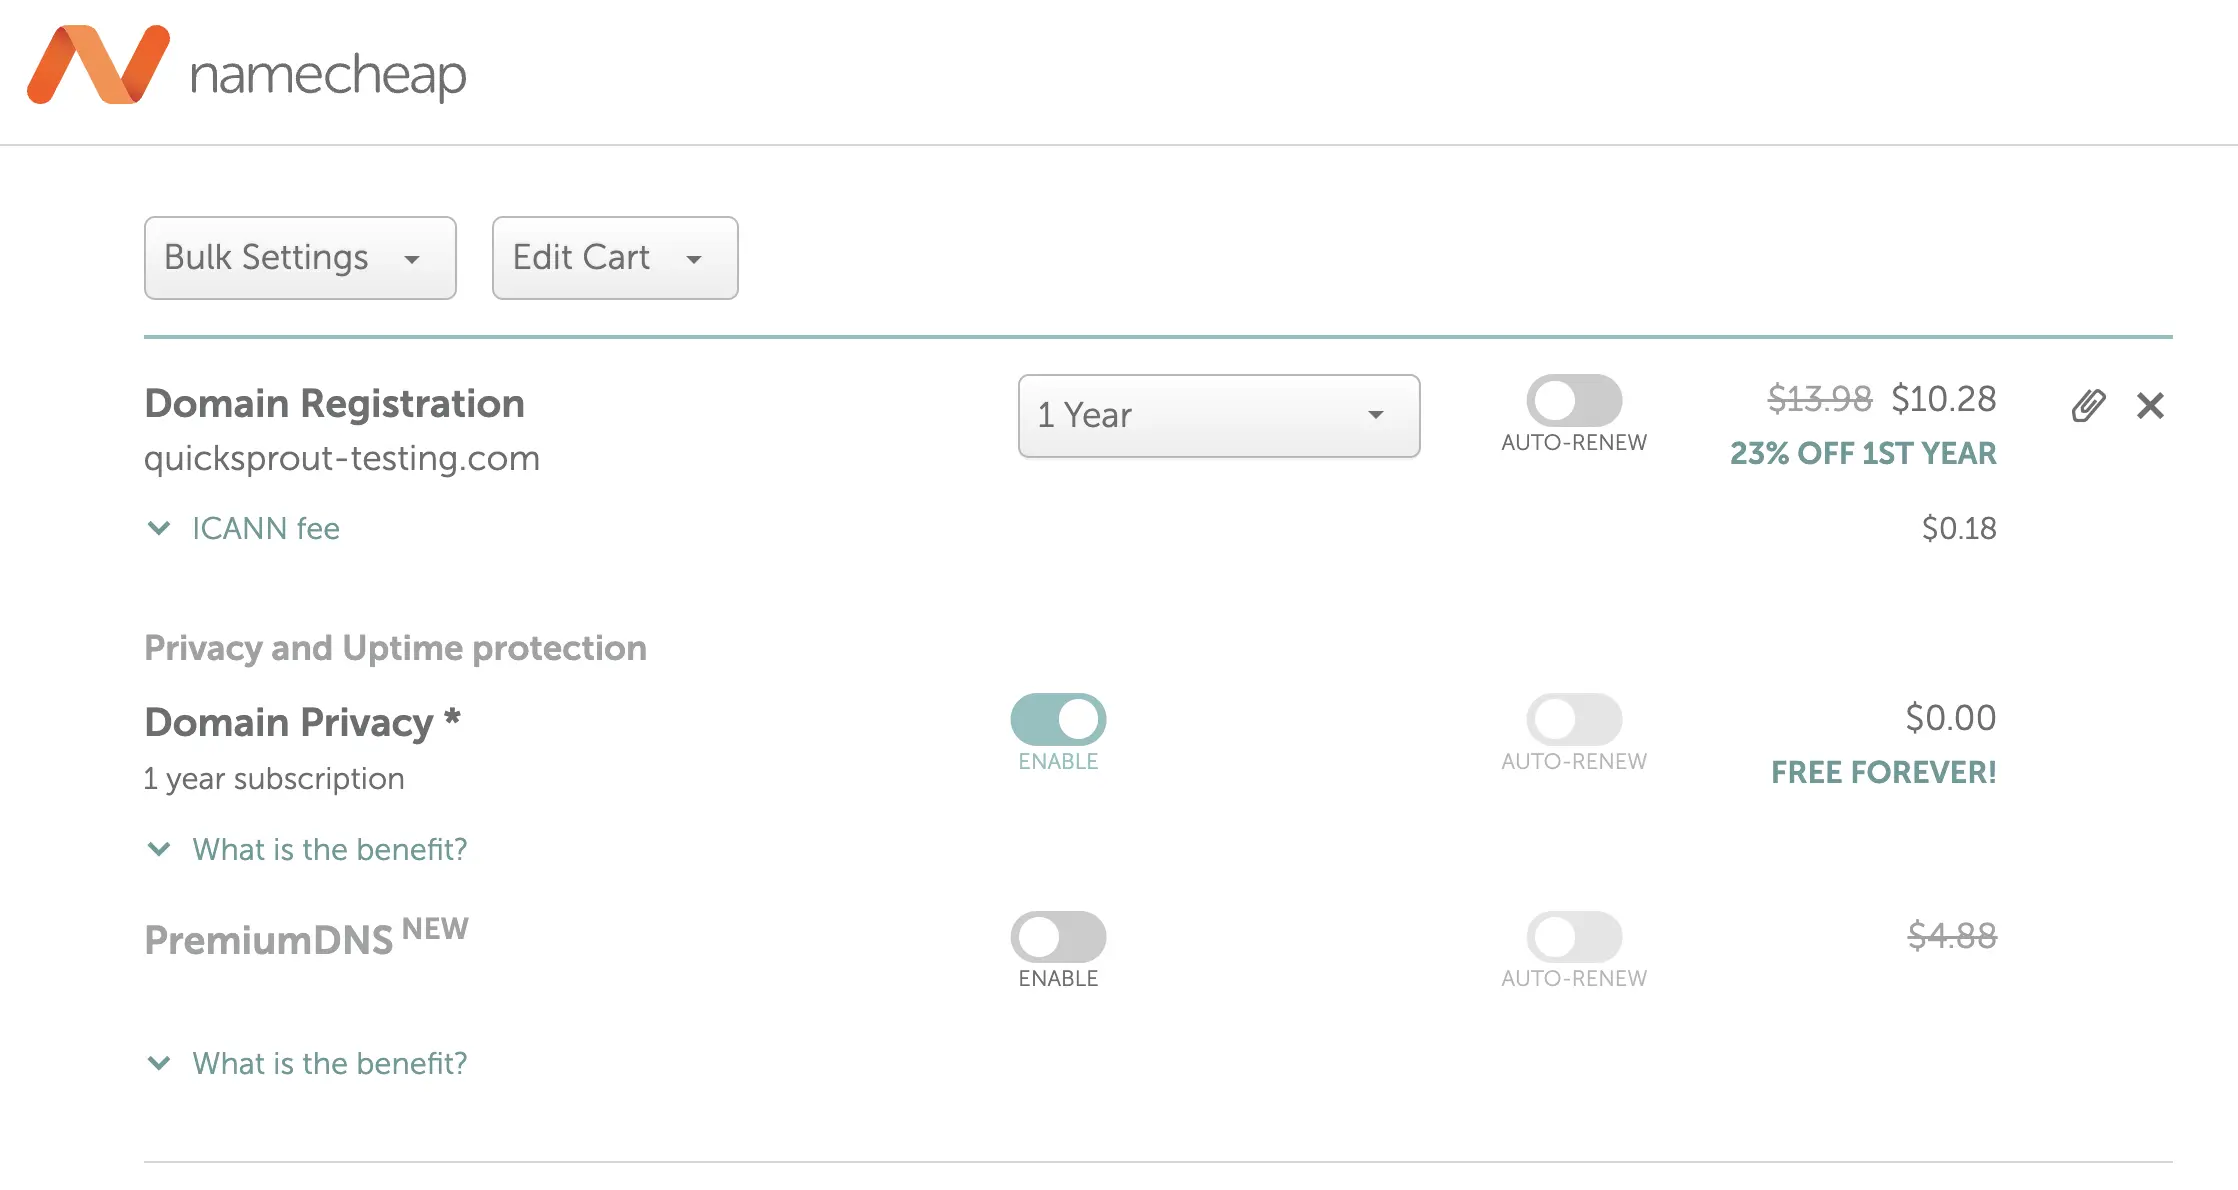 Namecheap final checkout screen with free WhoisGuard